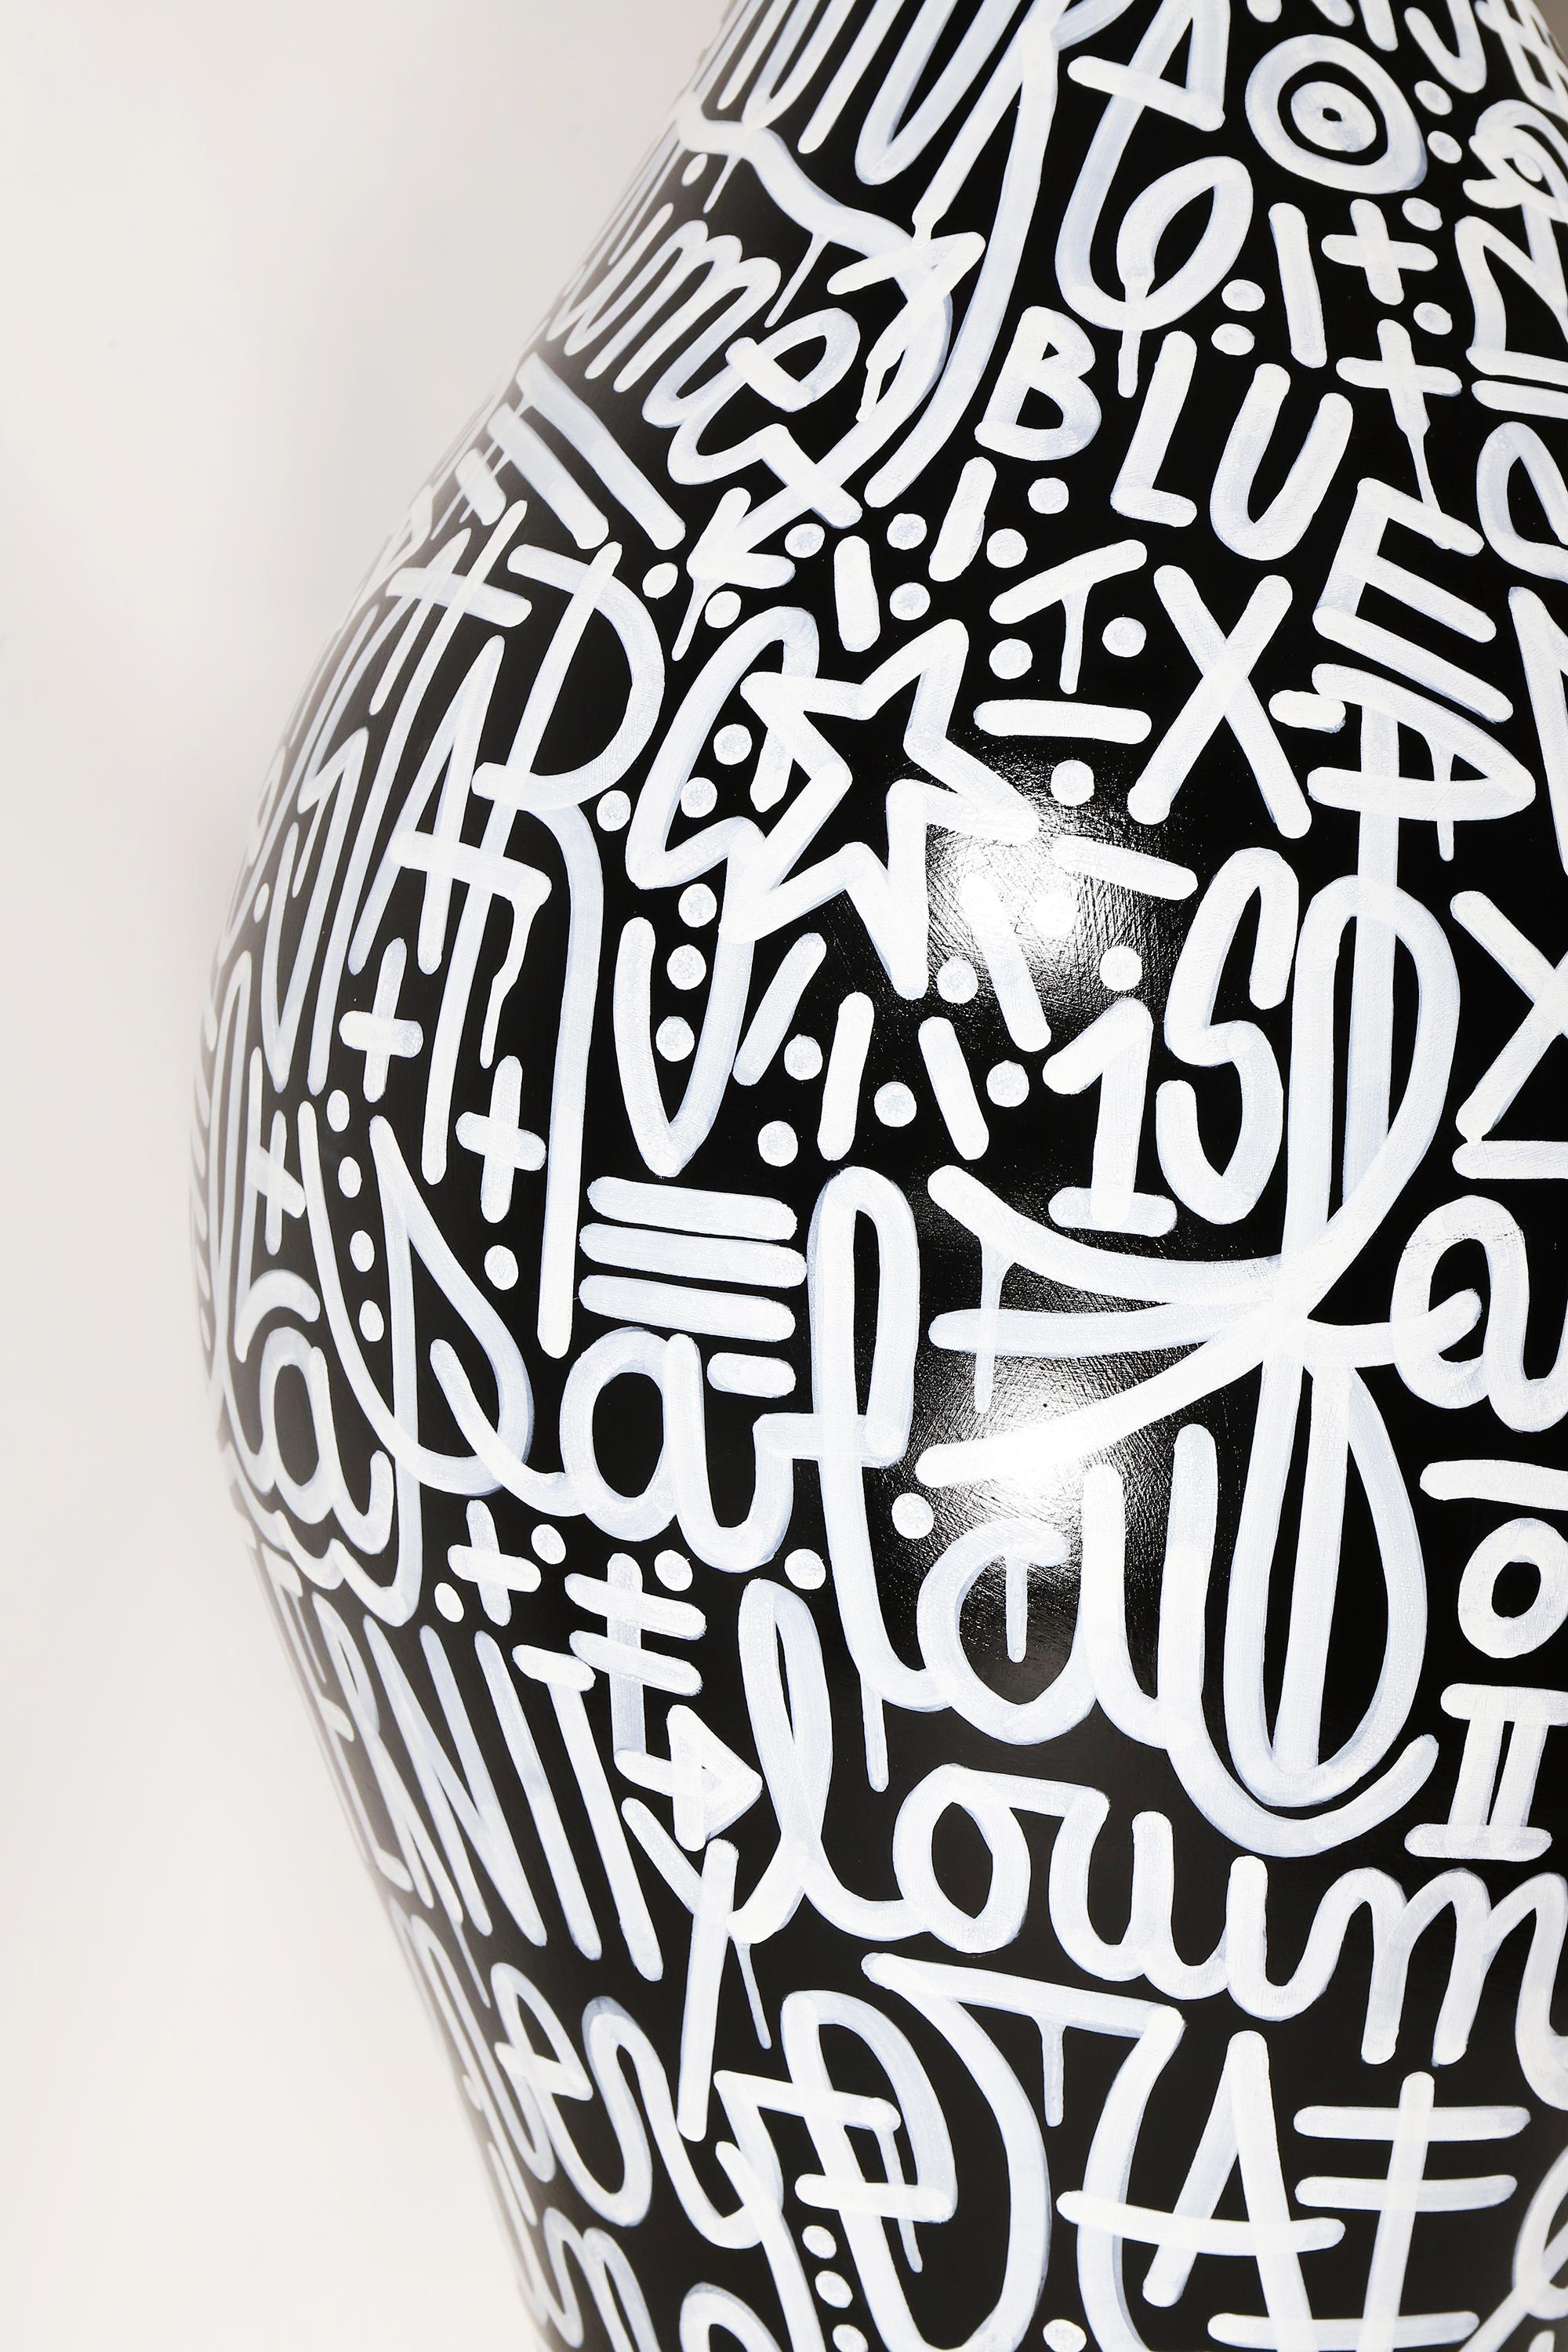 'Infinity' Acrylic Painted Lettering on Ceramic Sculpture - Gray Abstract Sculpture by Grégoire Devin